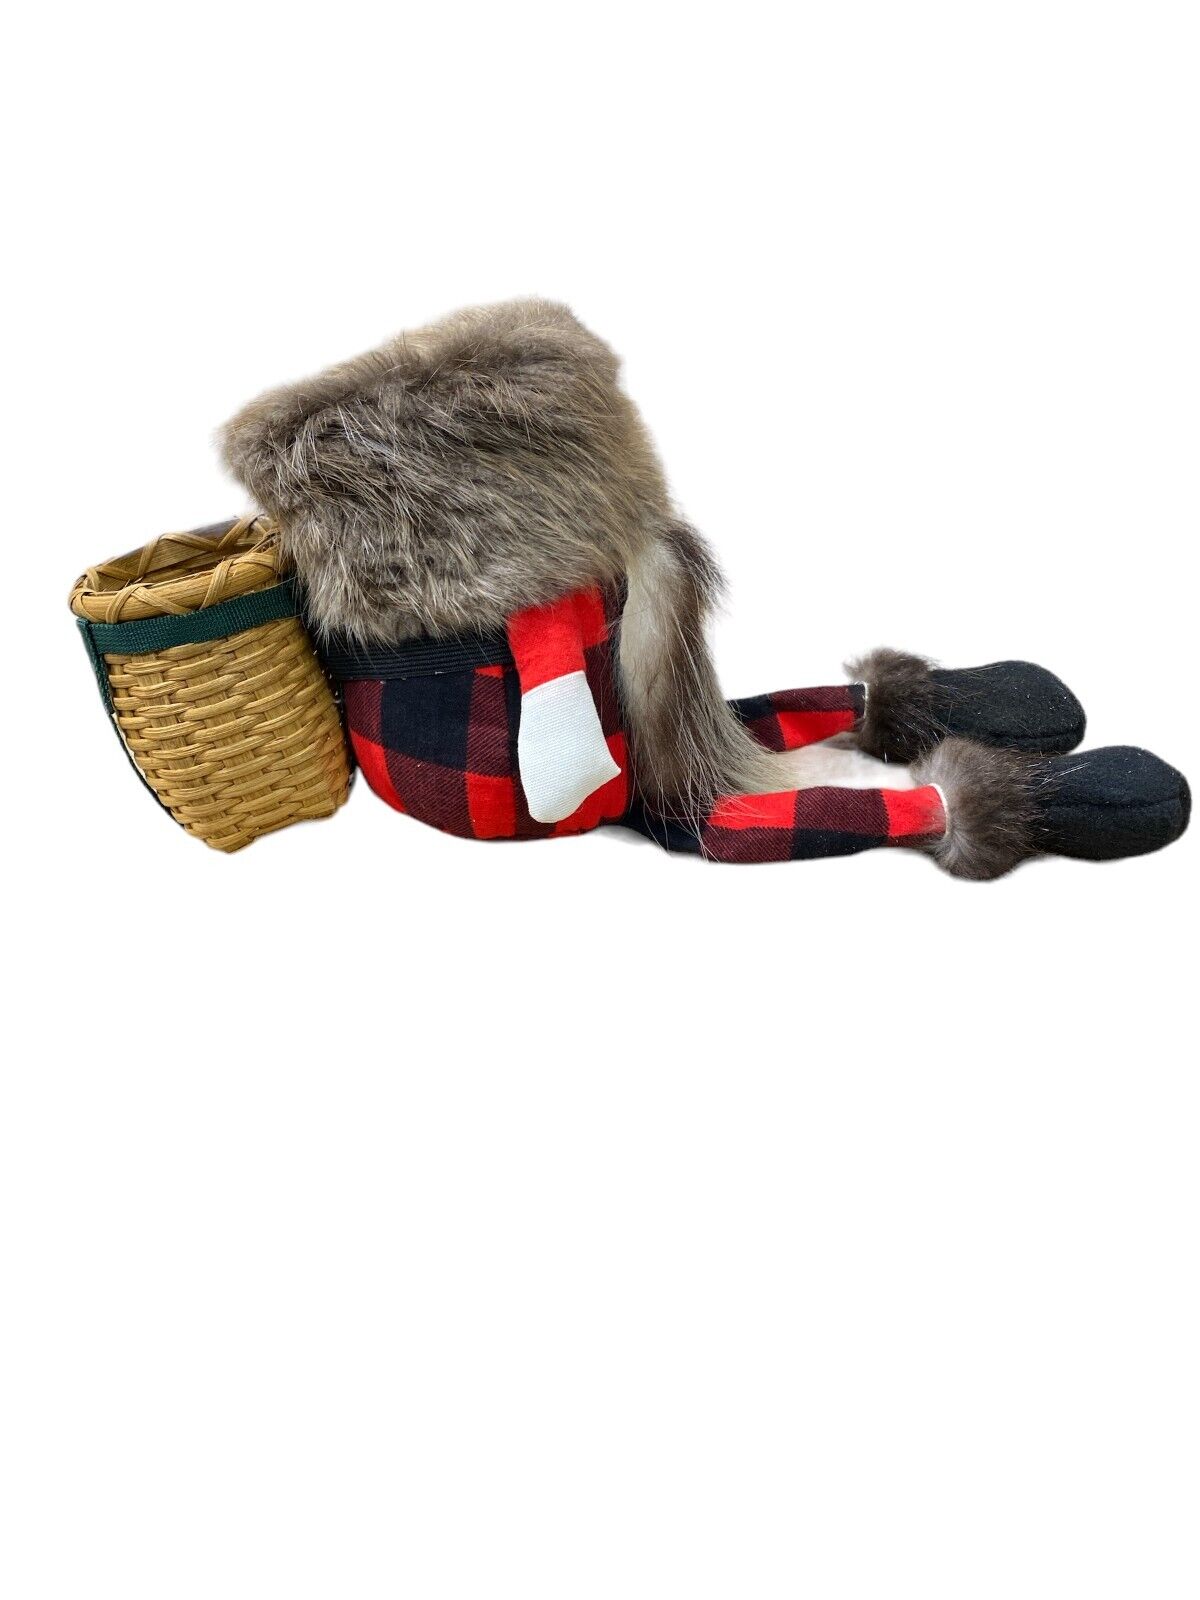 MOUNTAINMAN TRAPPER GNOME ~ Woolrich Red Plaid ~ Real WILD FUR Hat, Beard, Boots